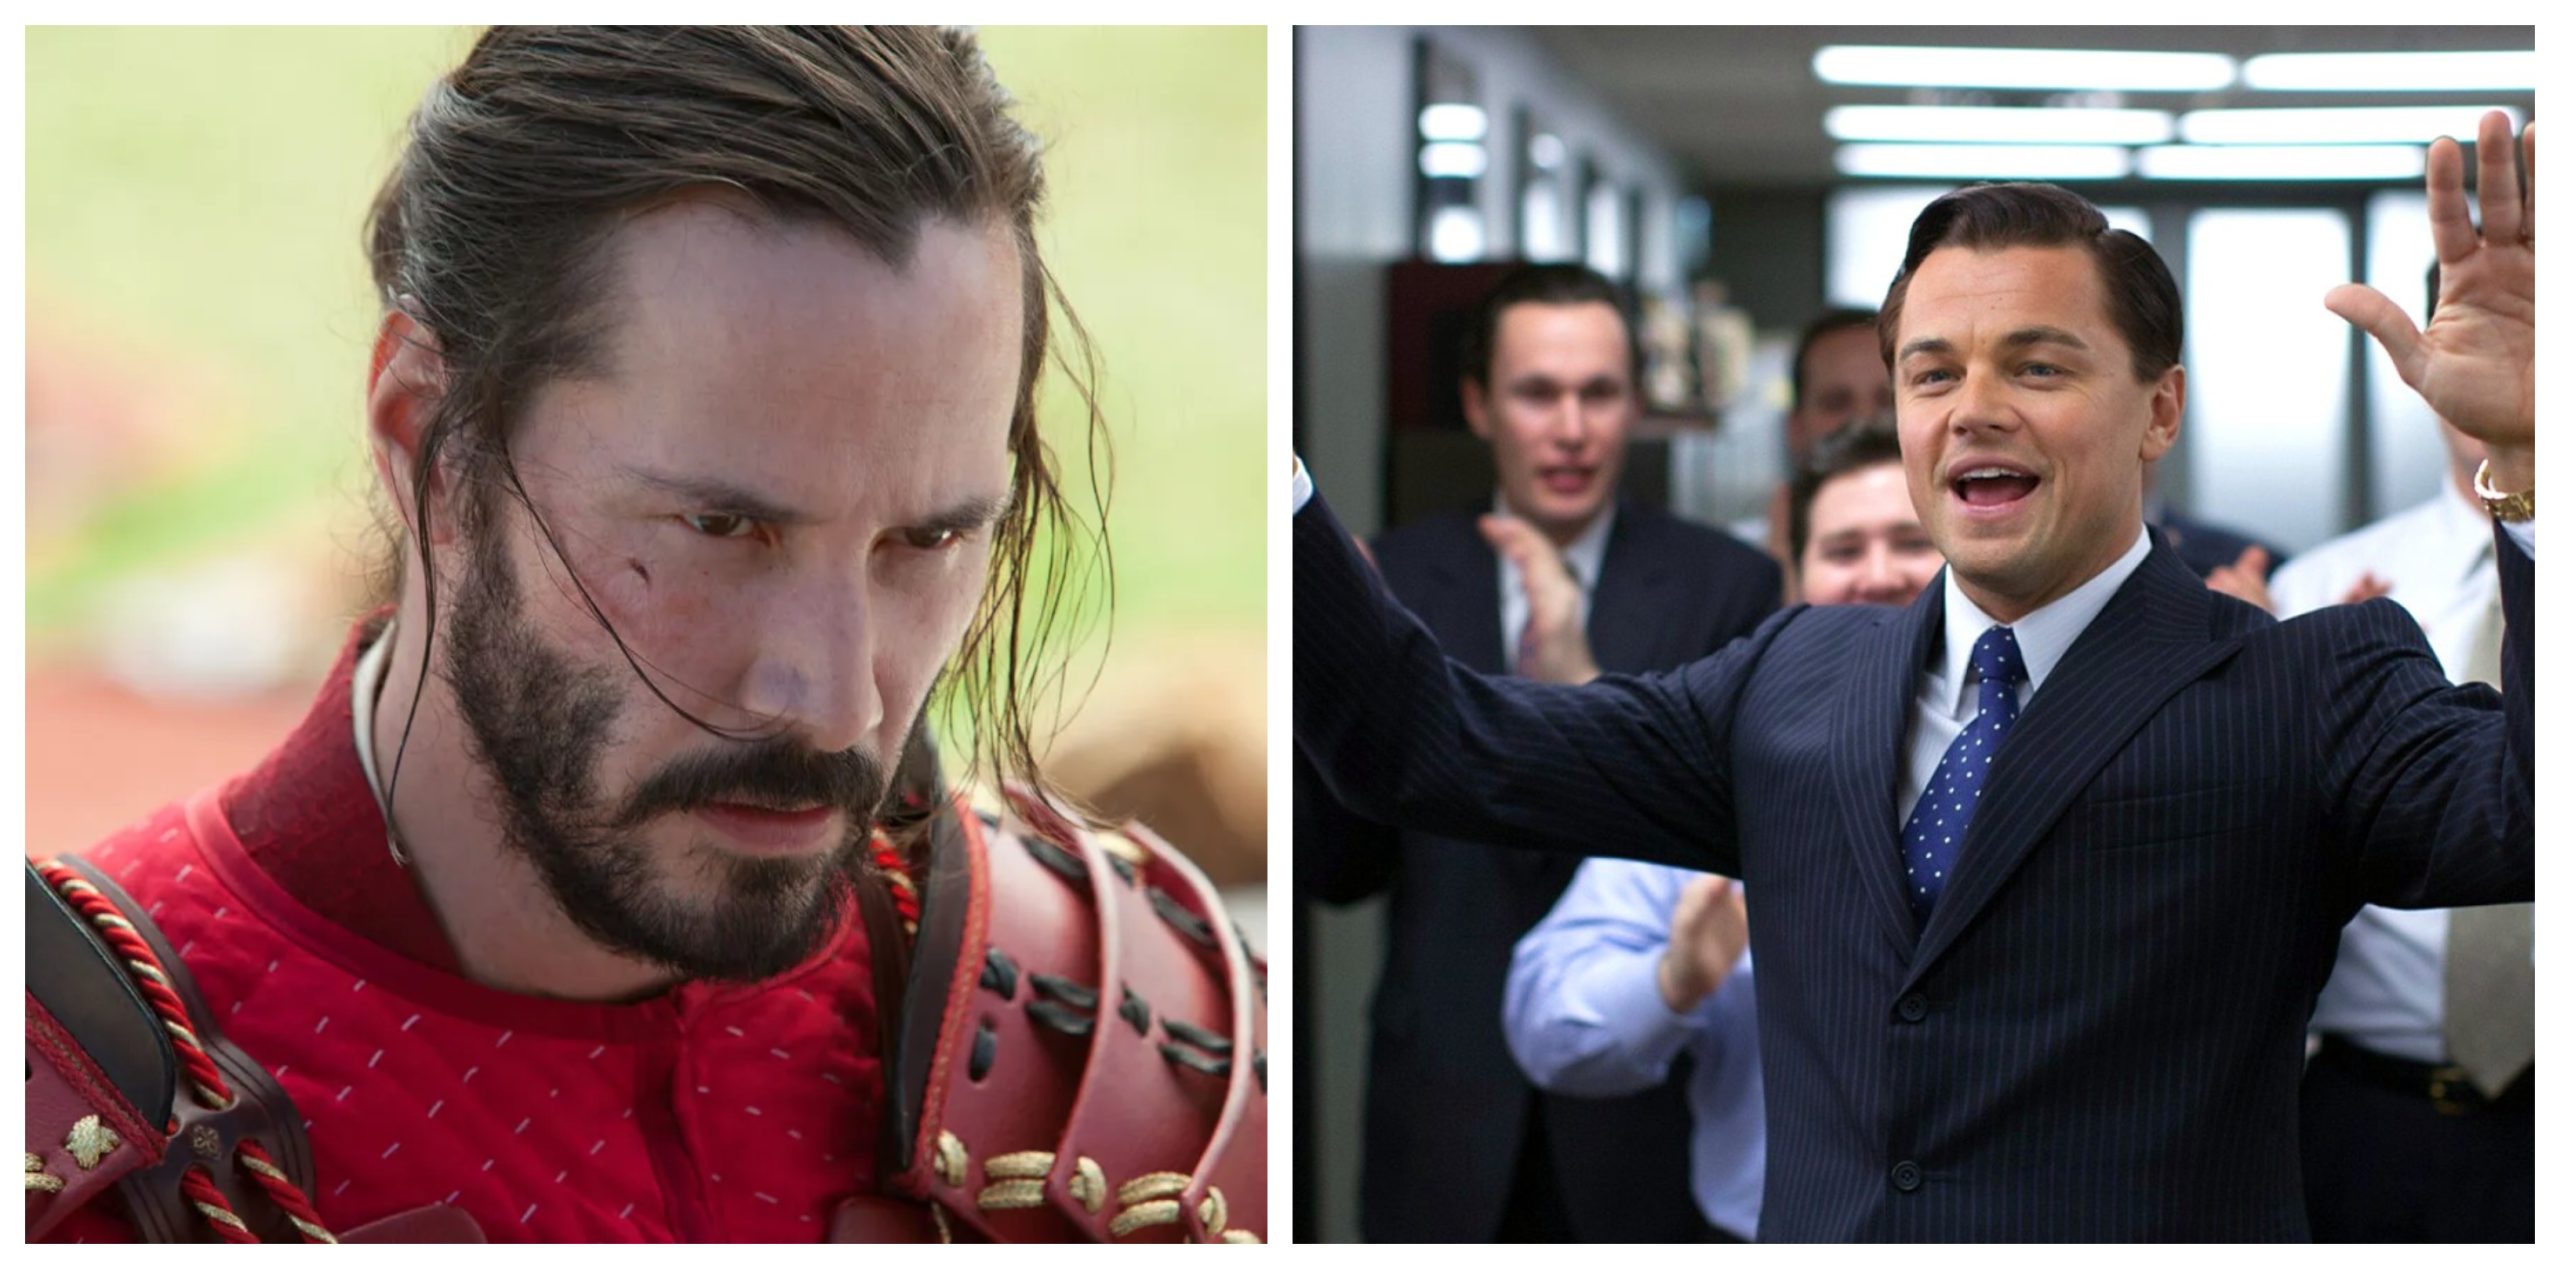 Keanu Reeves in 47 Ronin and Leonardo DiCaprio in Wolf of the Wall Street